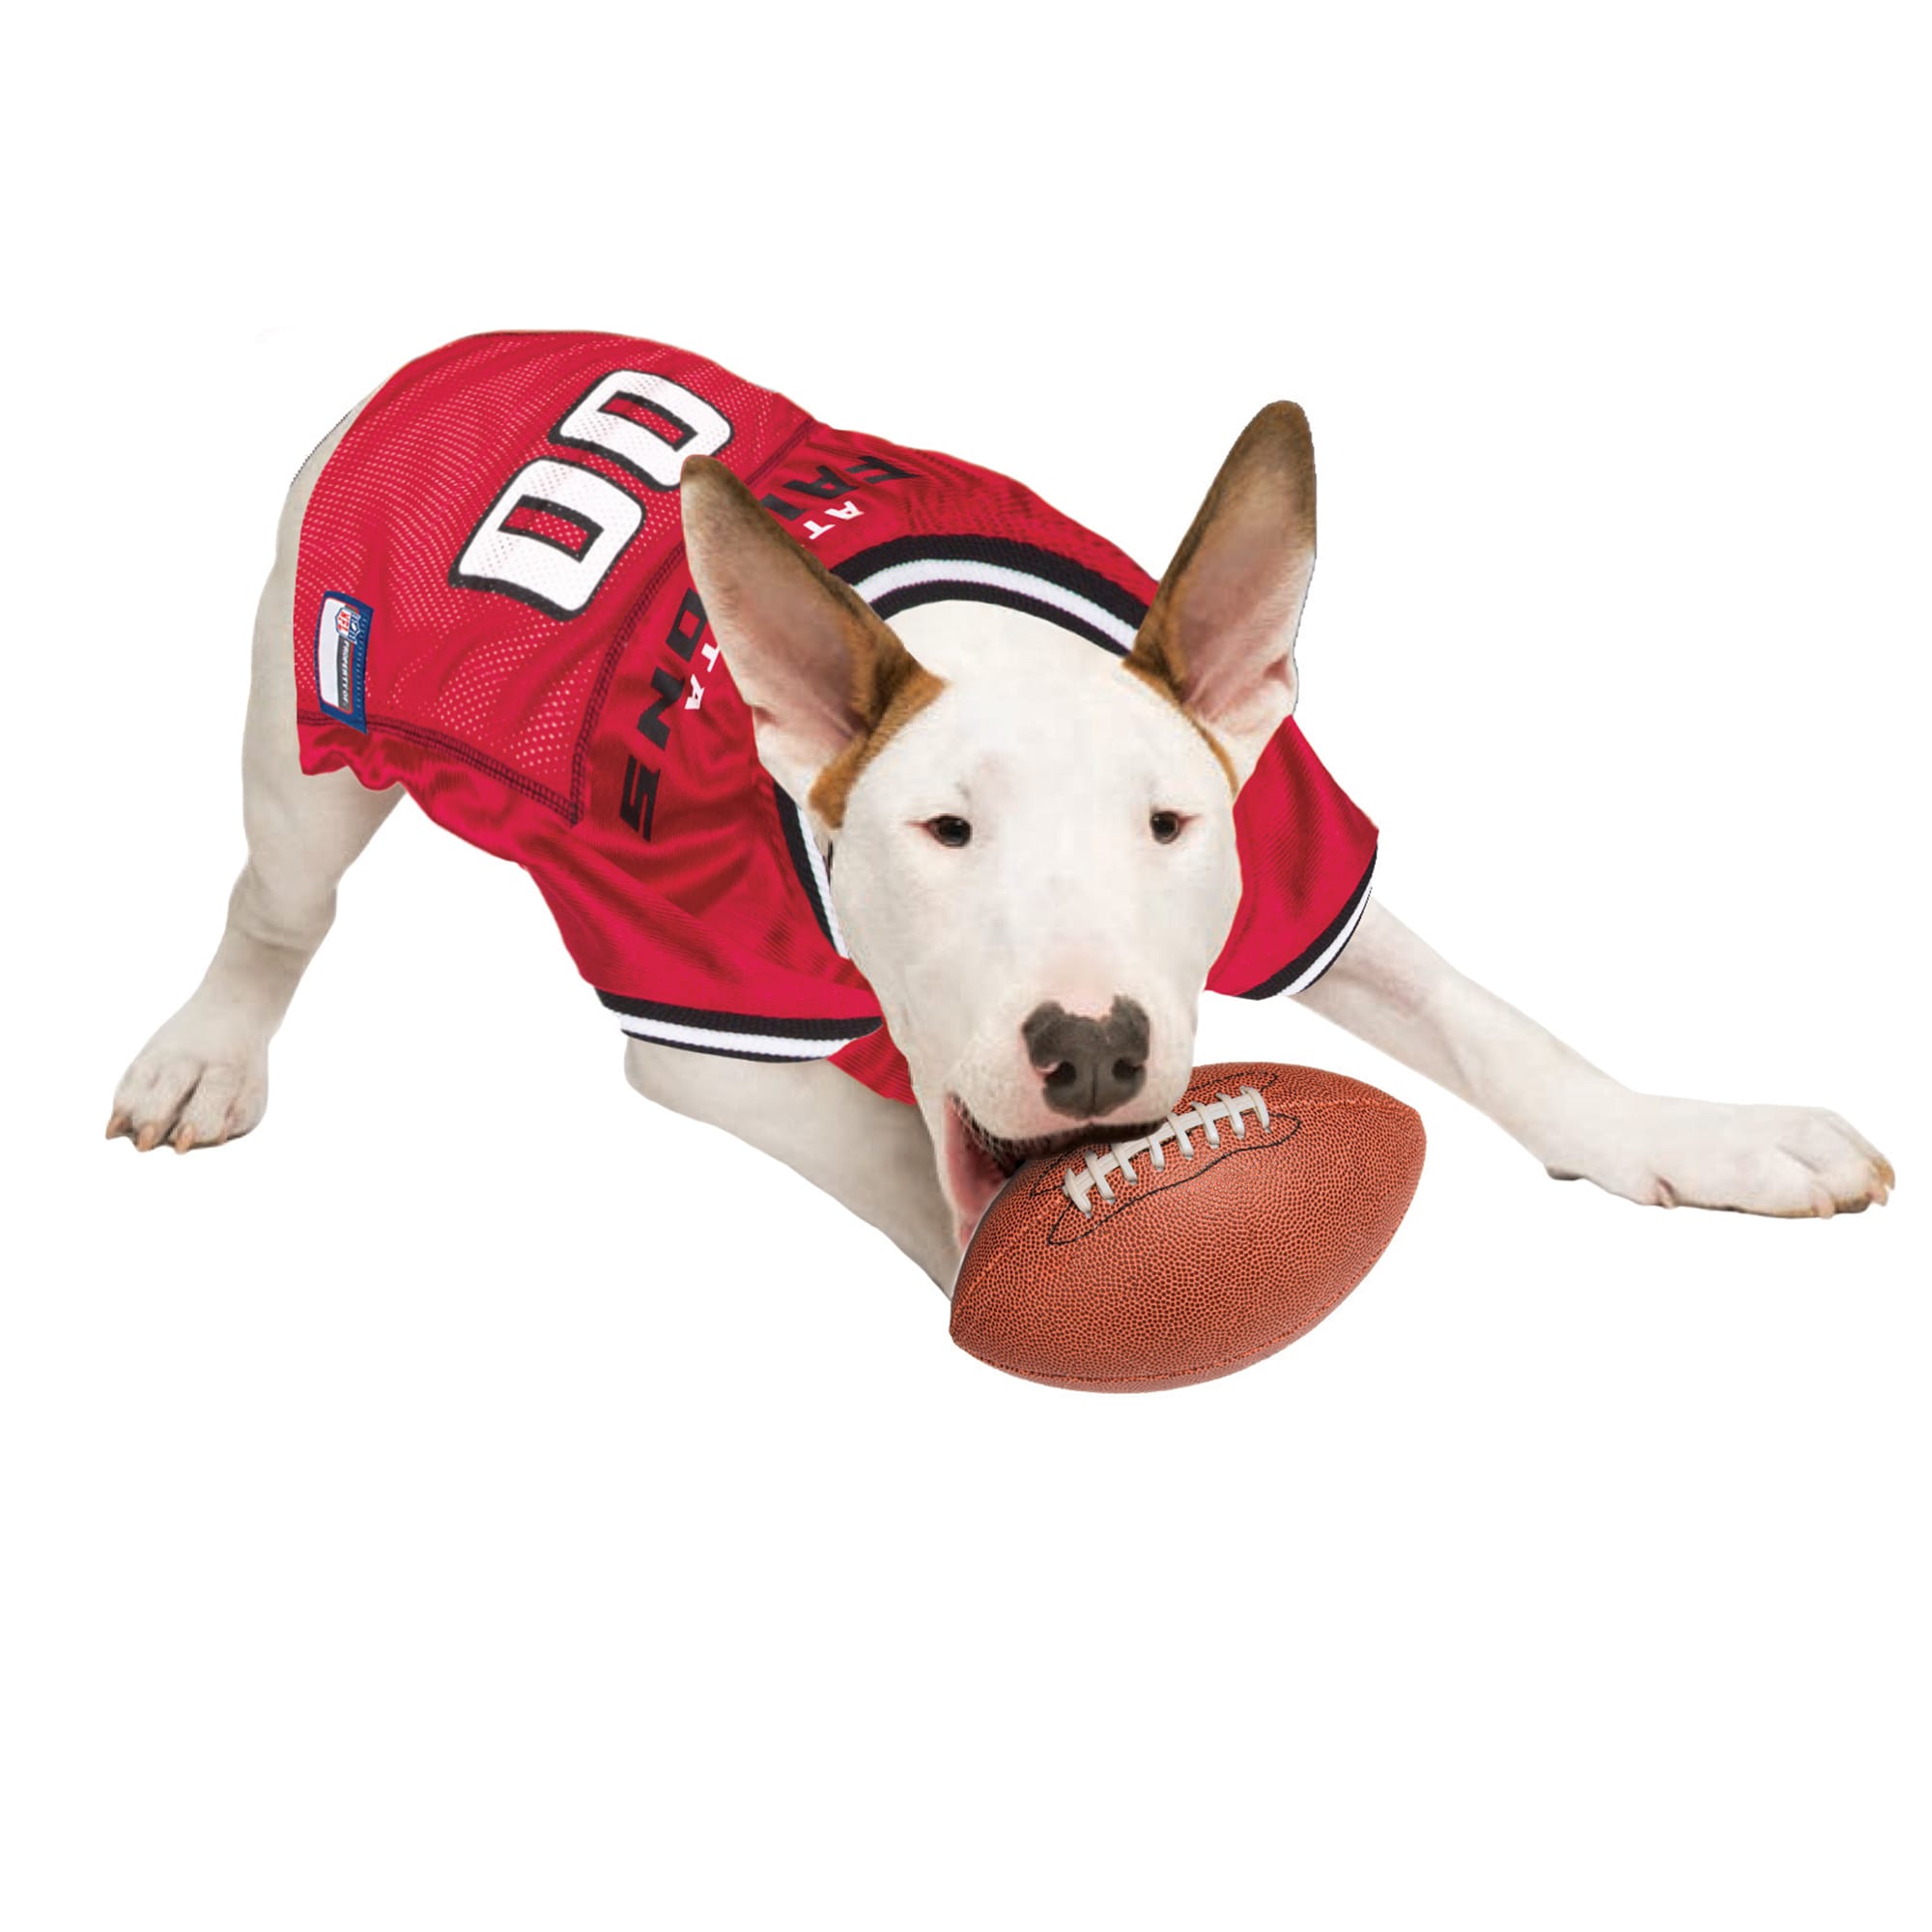  NFL Atlanta Falcons Dog Jersey, Size: X-Large. Best Football  Jersey Costume for Dogs & Cats. Licensed Jersey Shirt. : Sports & Outdoors